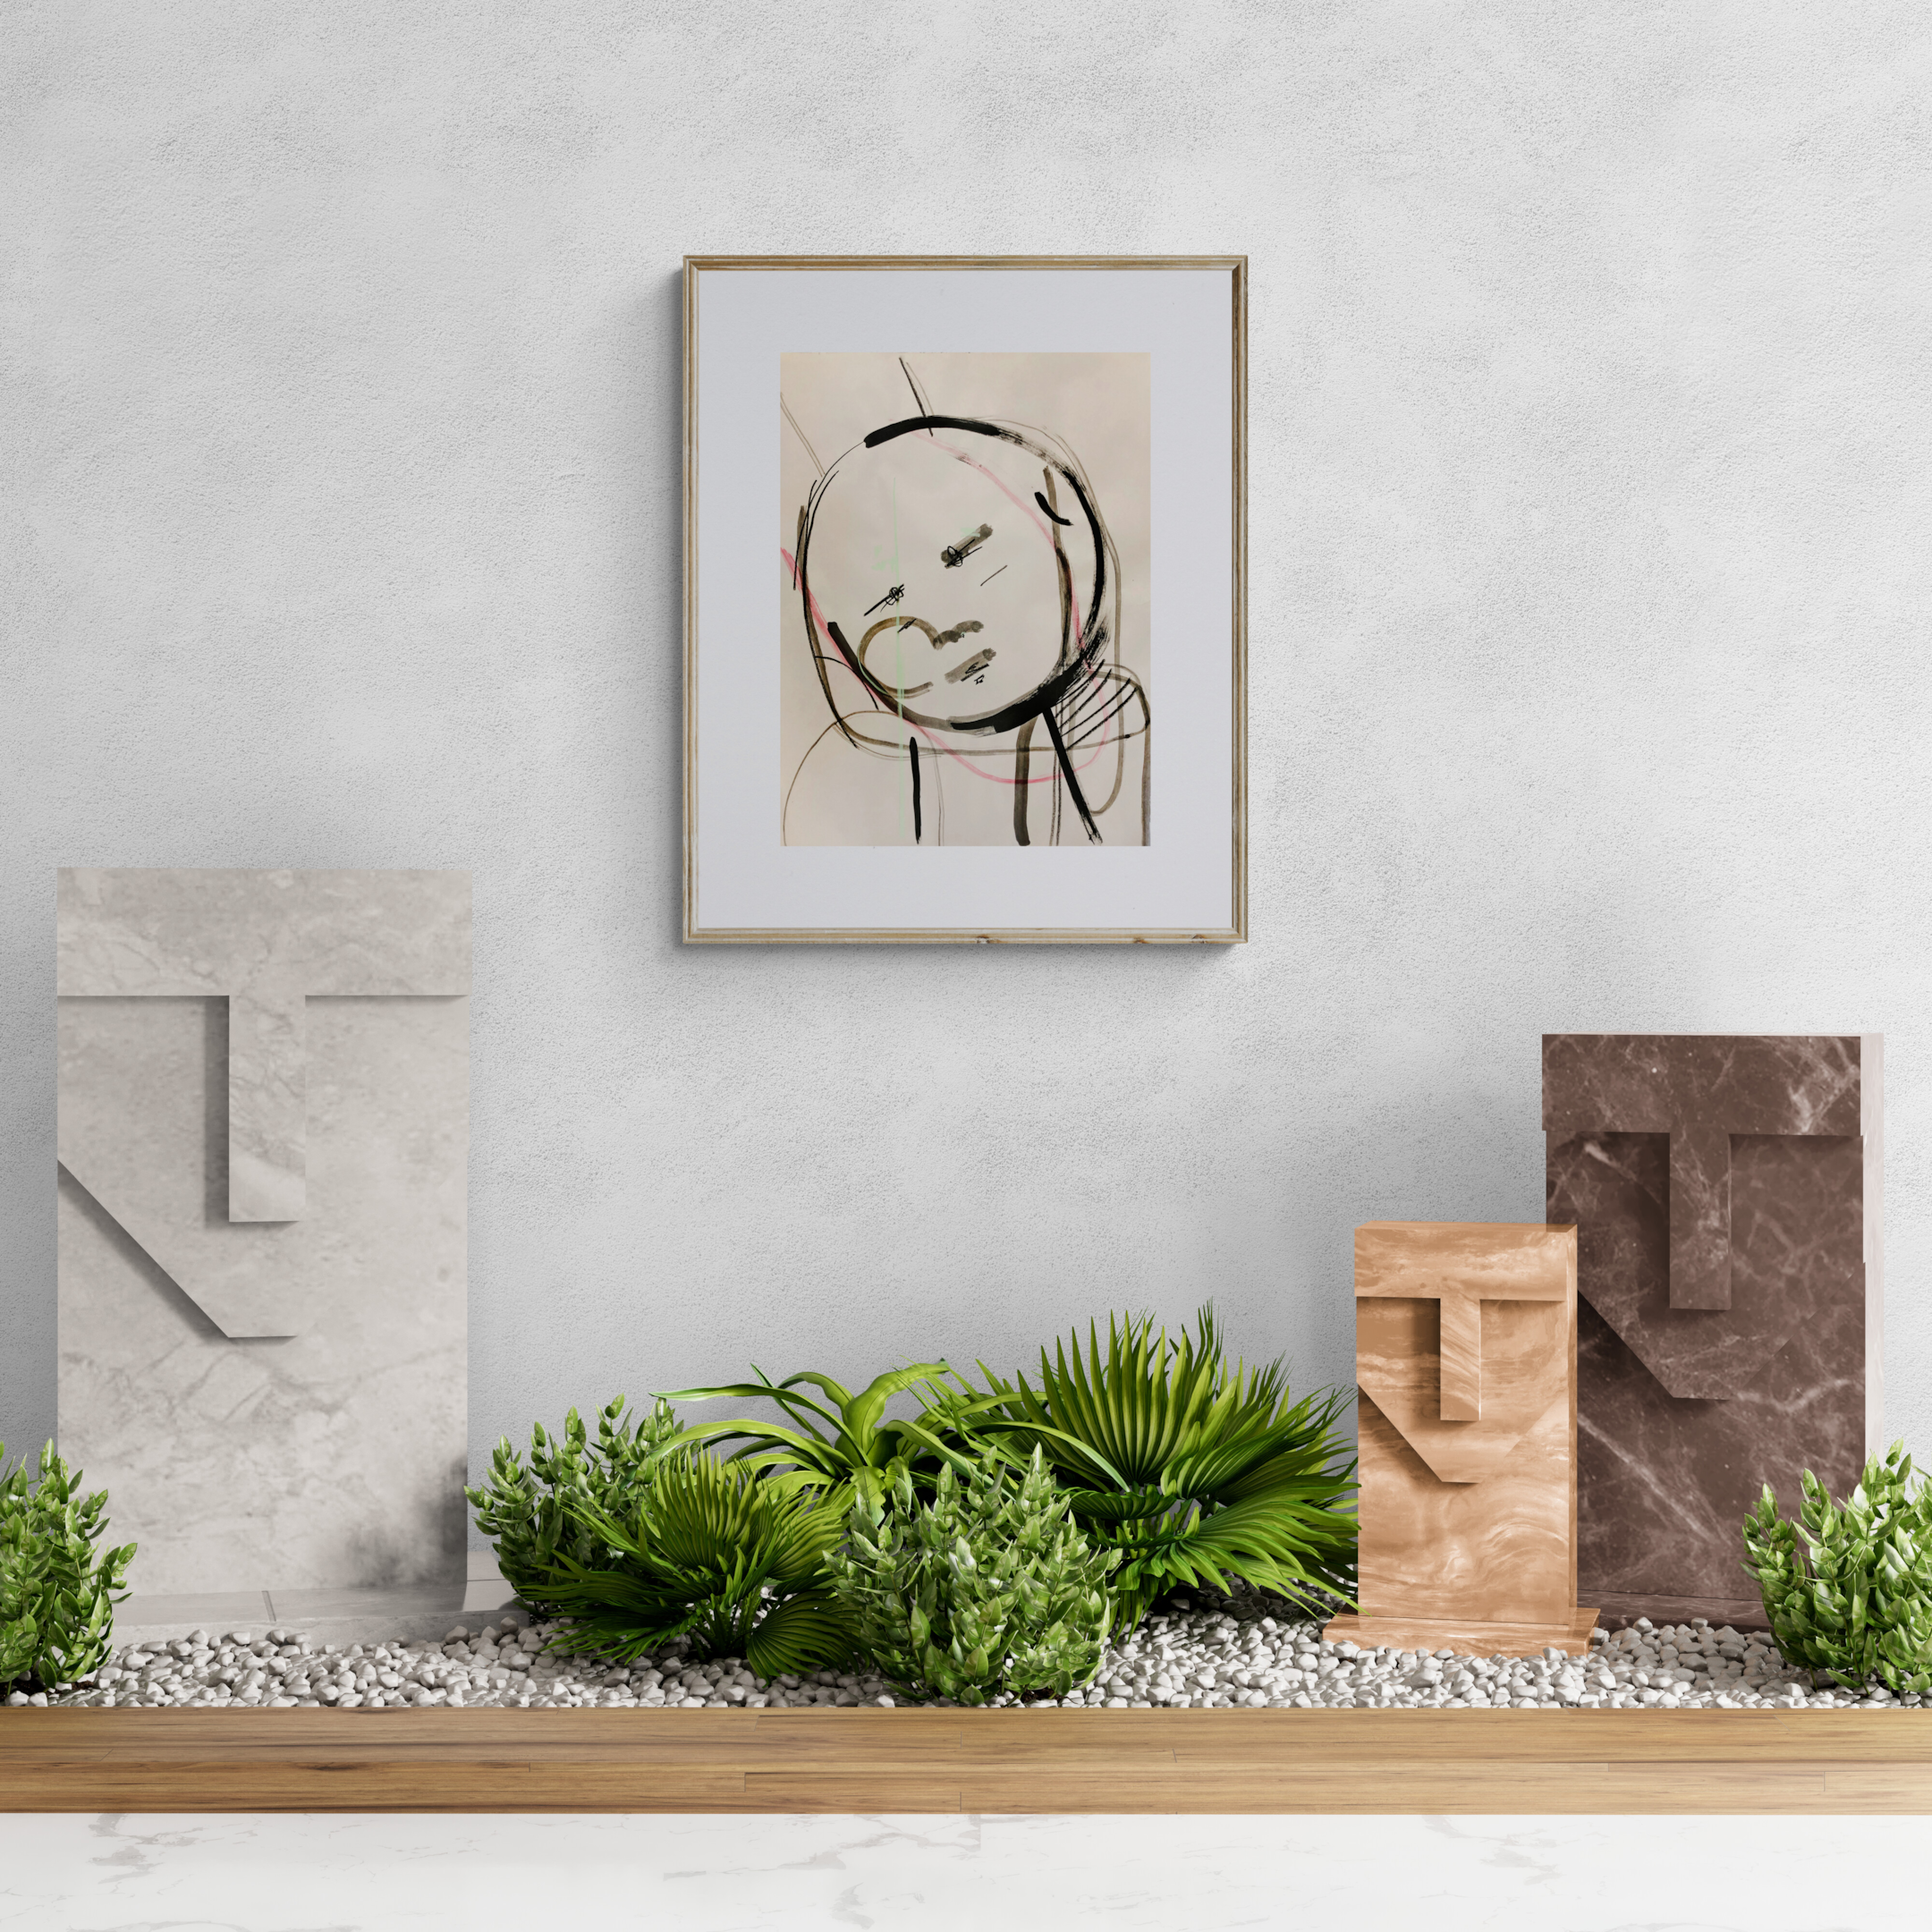 A Unique interior garden with wall art by Liz Wurzinger.